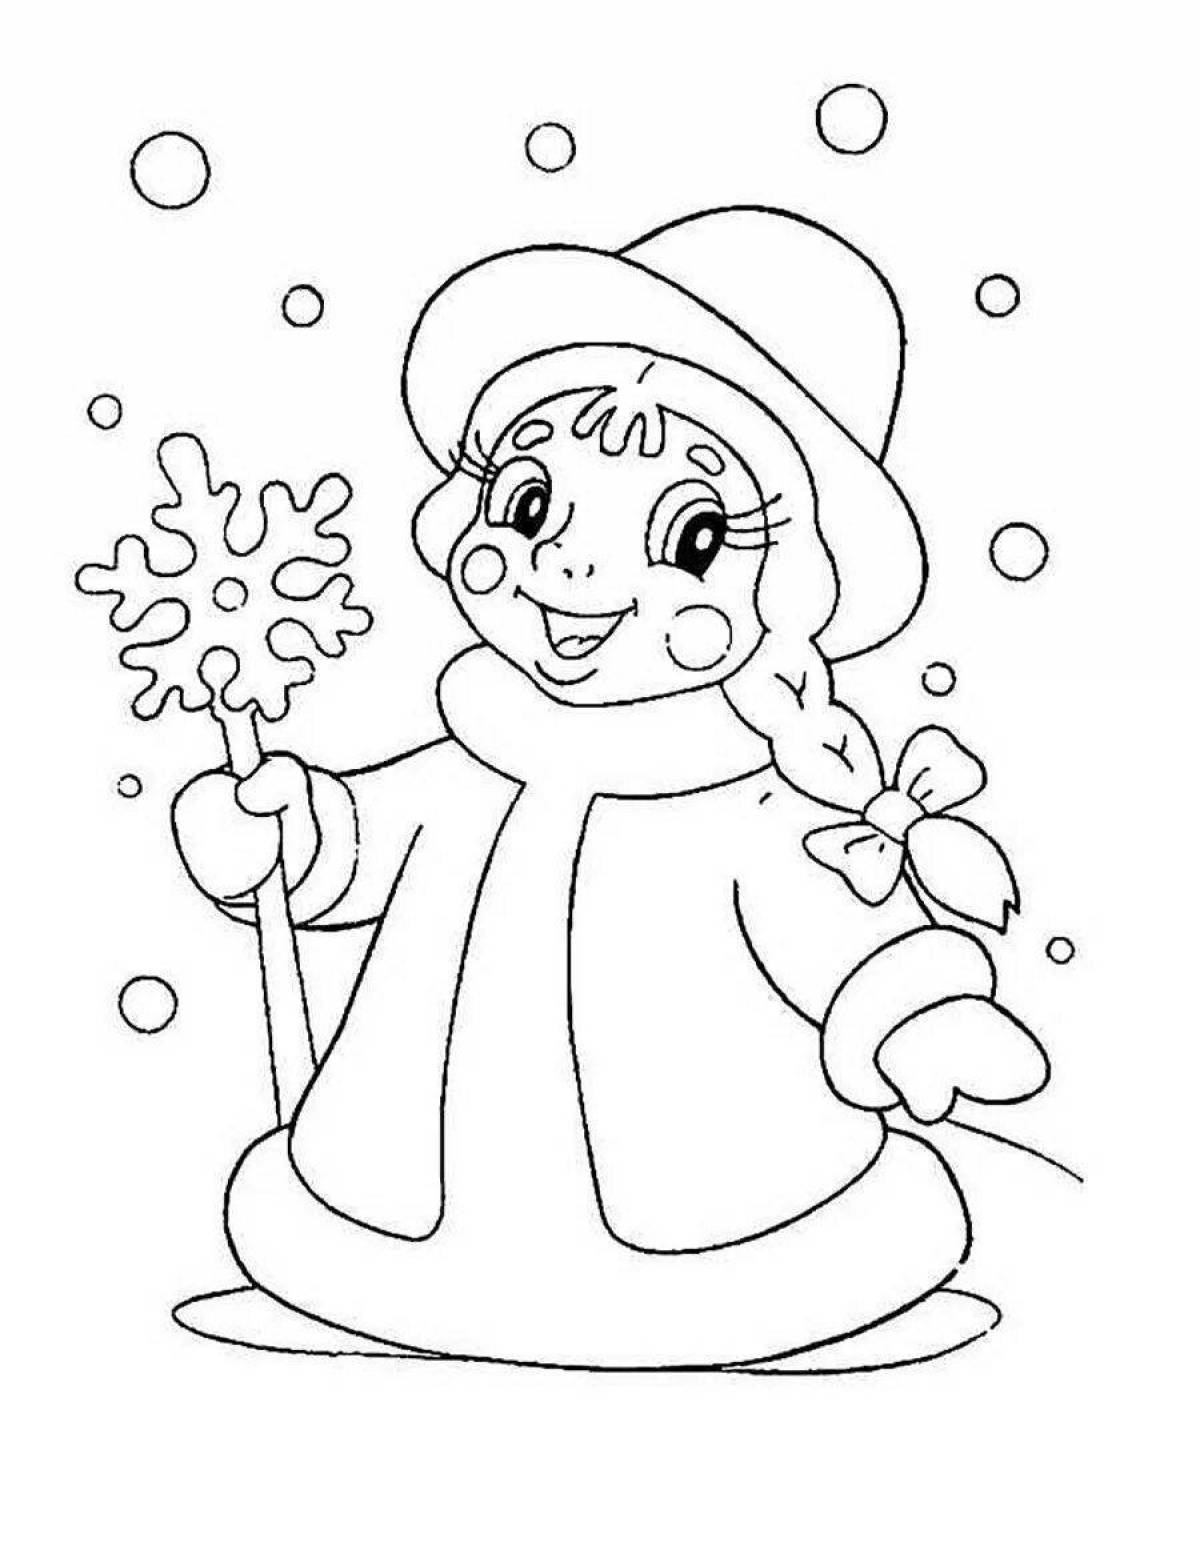 Fancy Christmas Snow Maiden coloring book